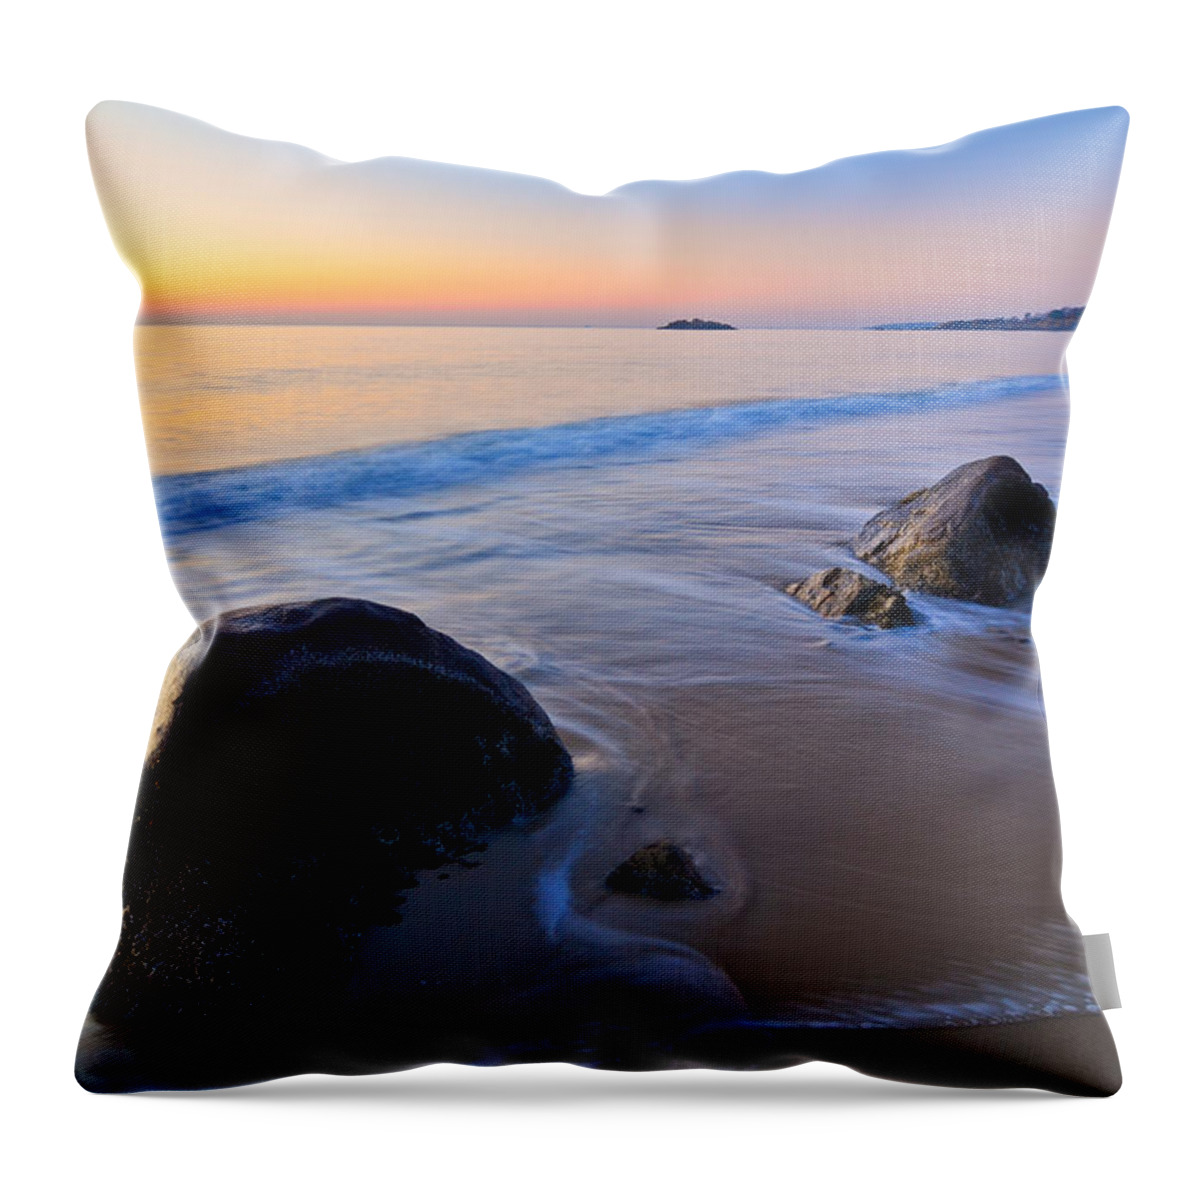 Sunrise Throw Pillow featuring the photograph A New Day Singing Beach by Michael Hubley